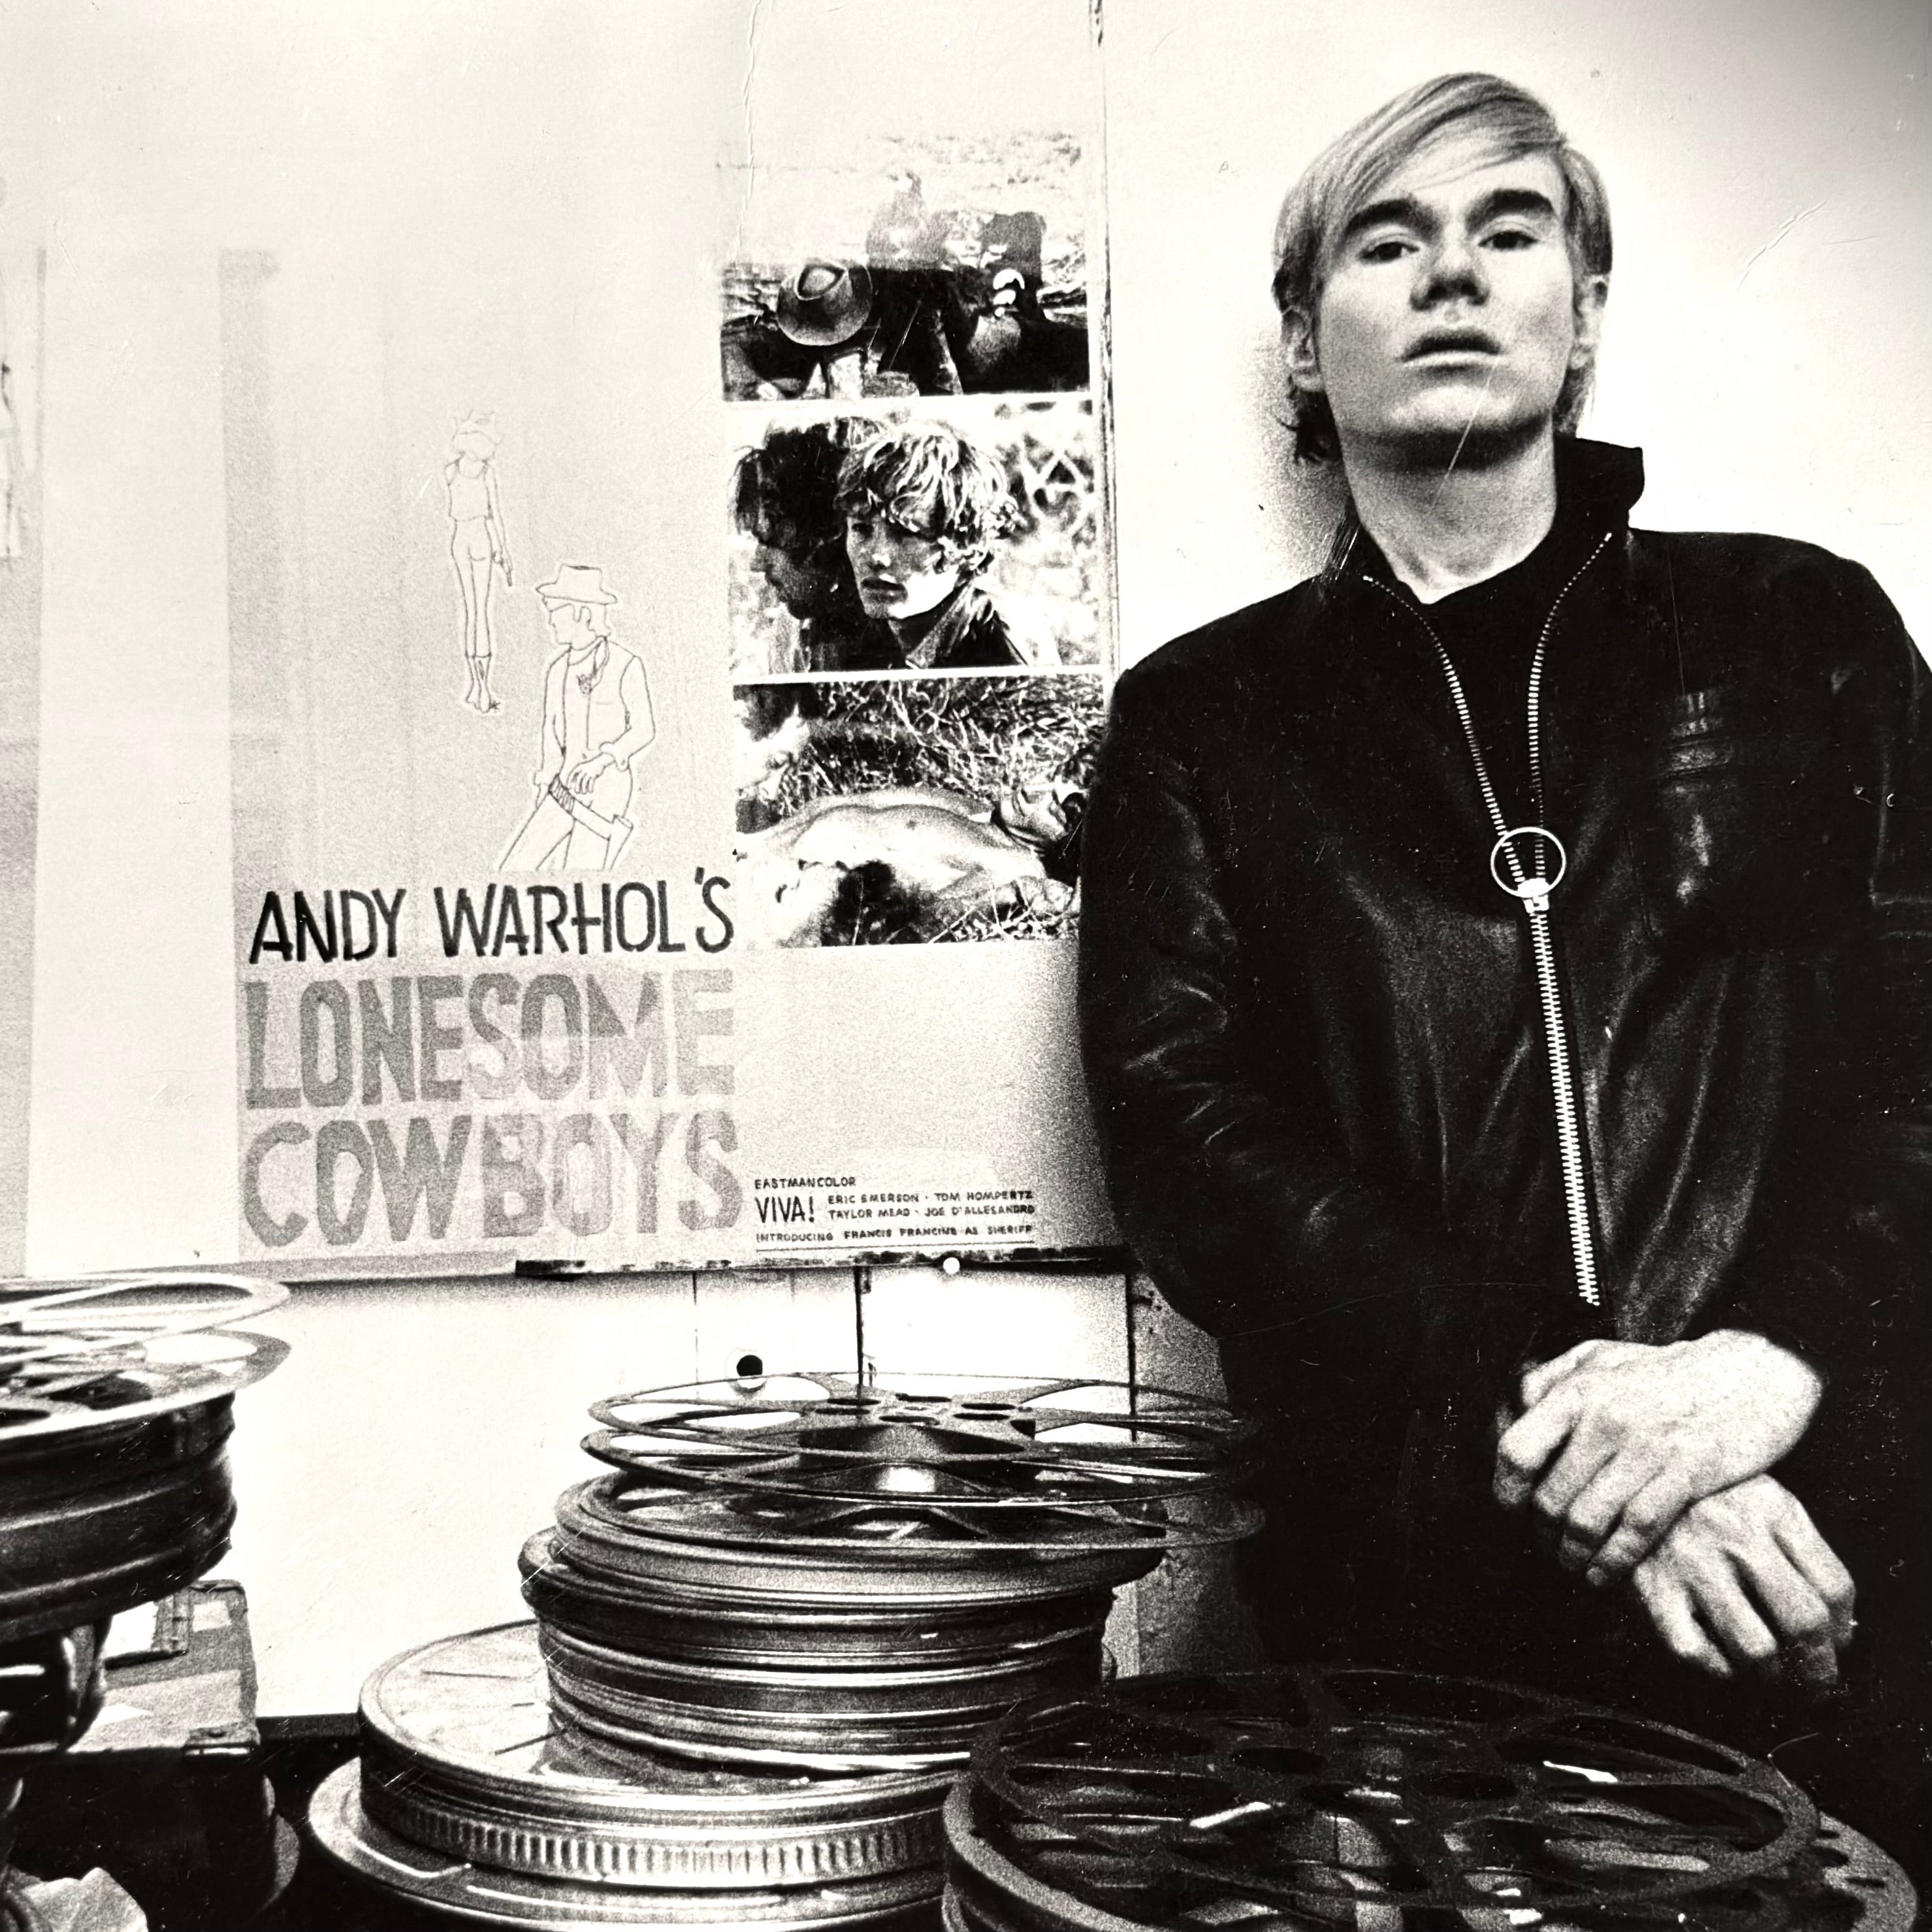 Jack Mitchell, Andy Warhol as Filmmaker, Black and White Photograph, 1968 For Sale